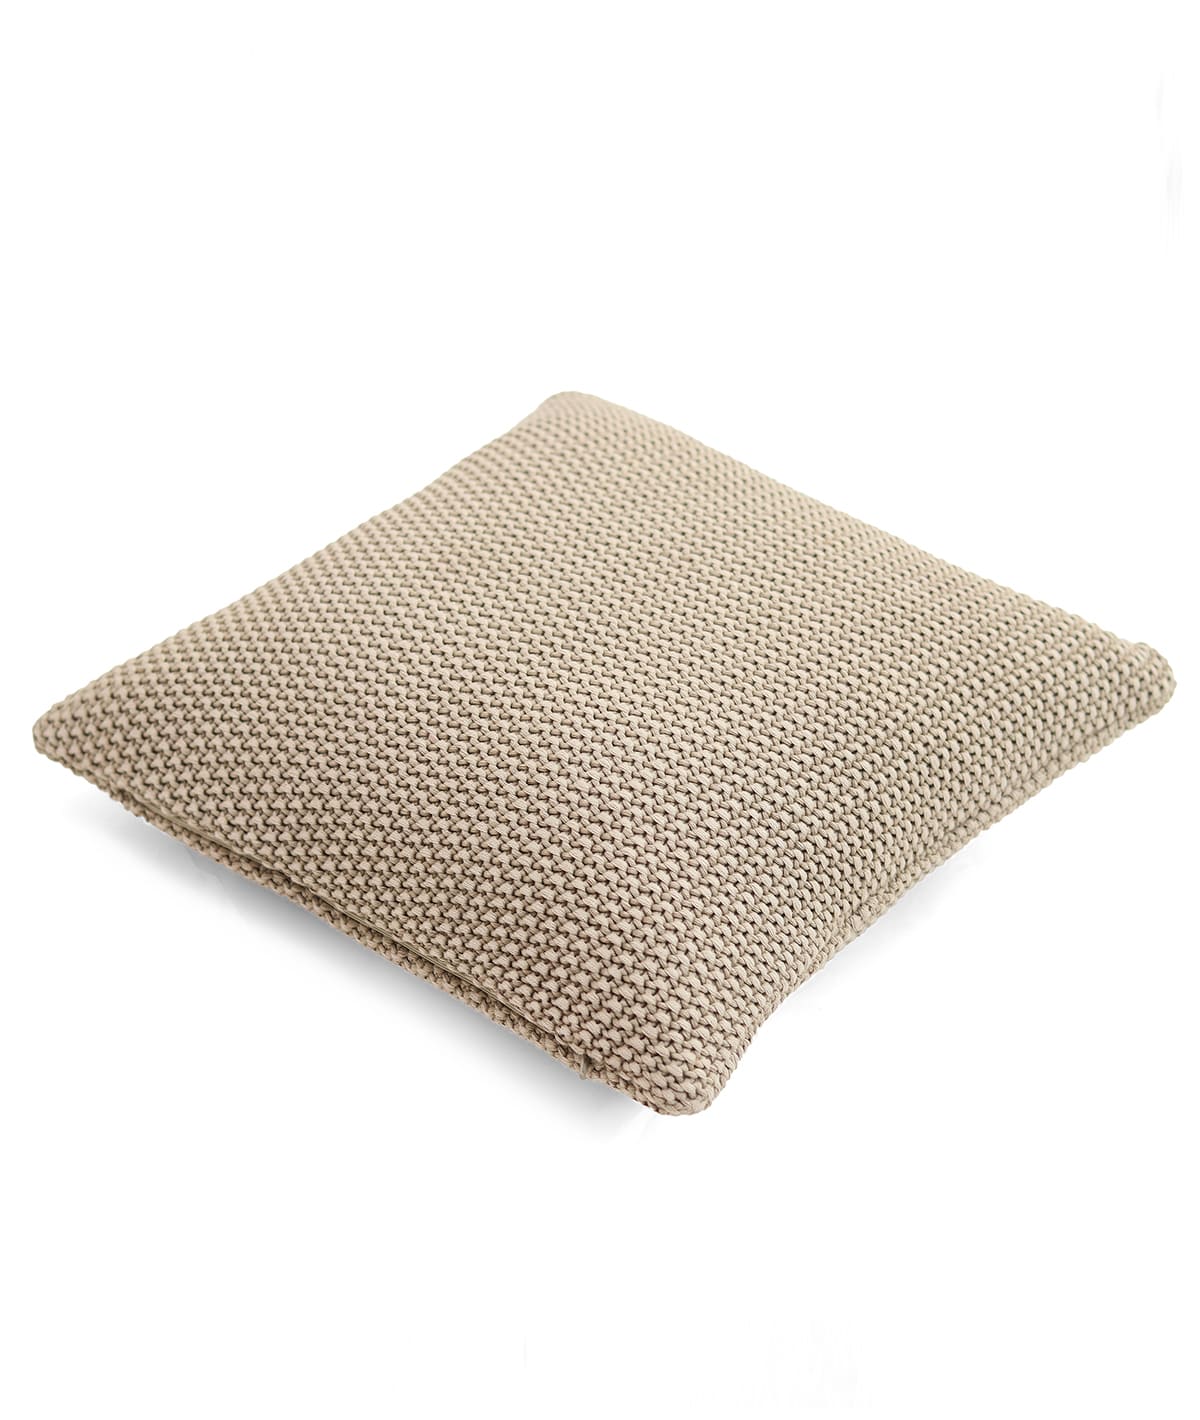 Knitted Purl Stone Cotton Knitted Decorative 16 X 16 Inches Cushion Cover